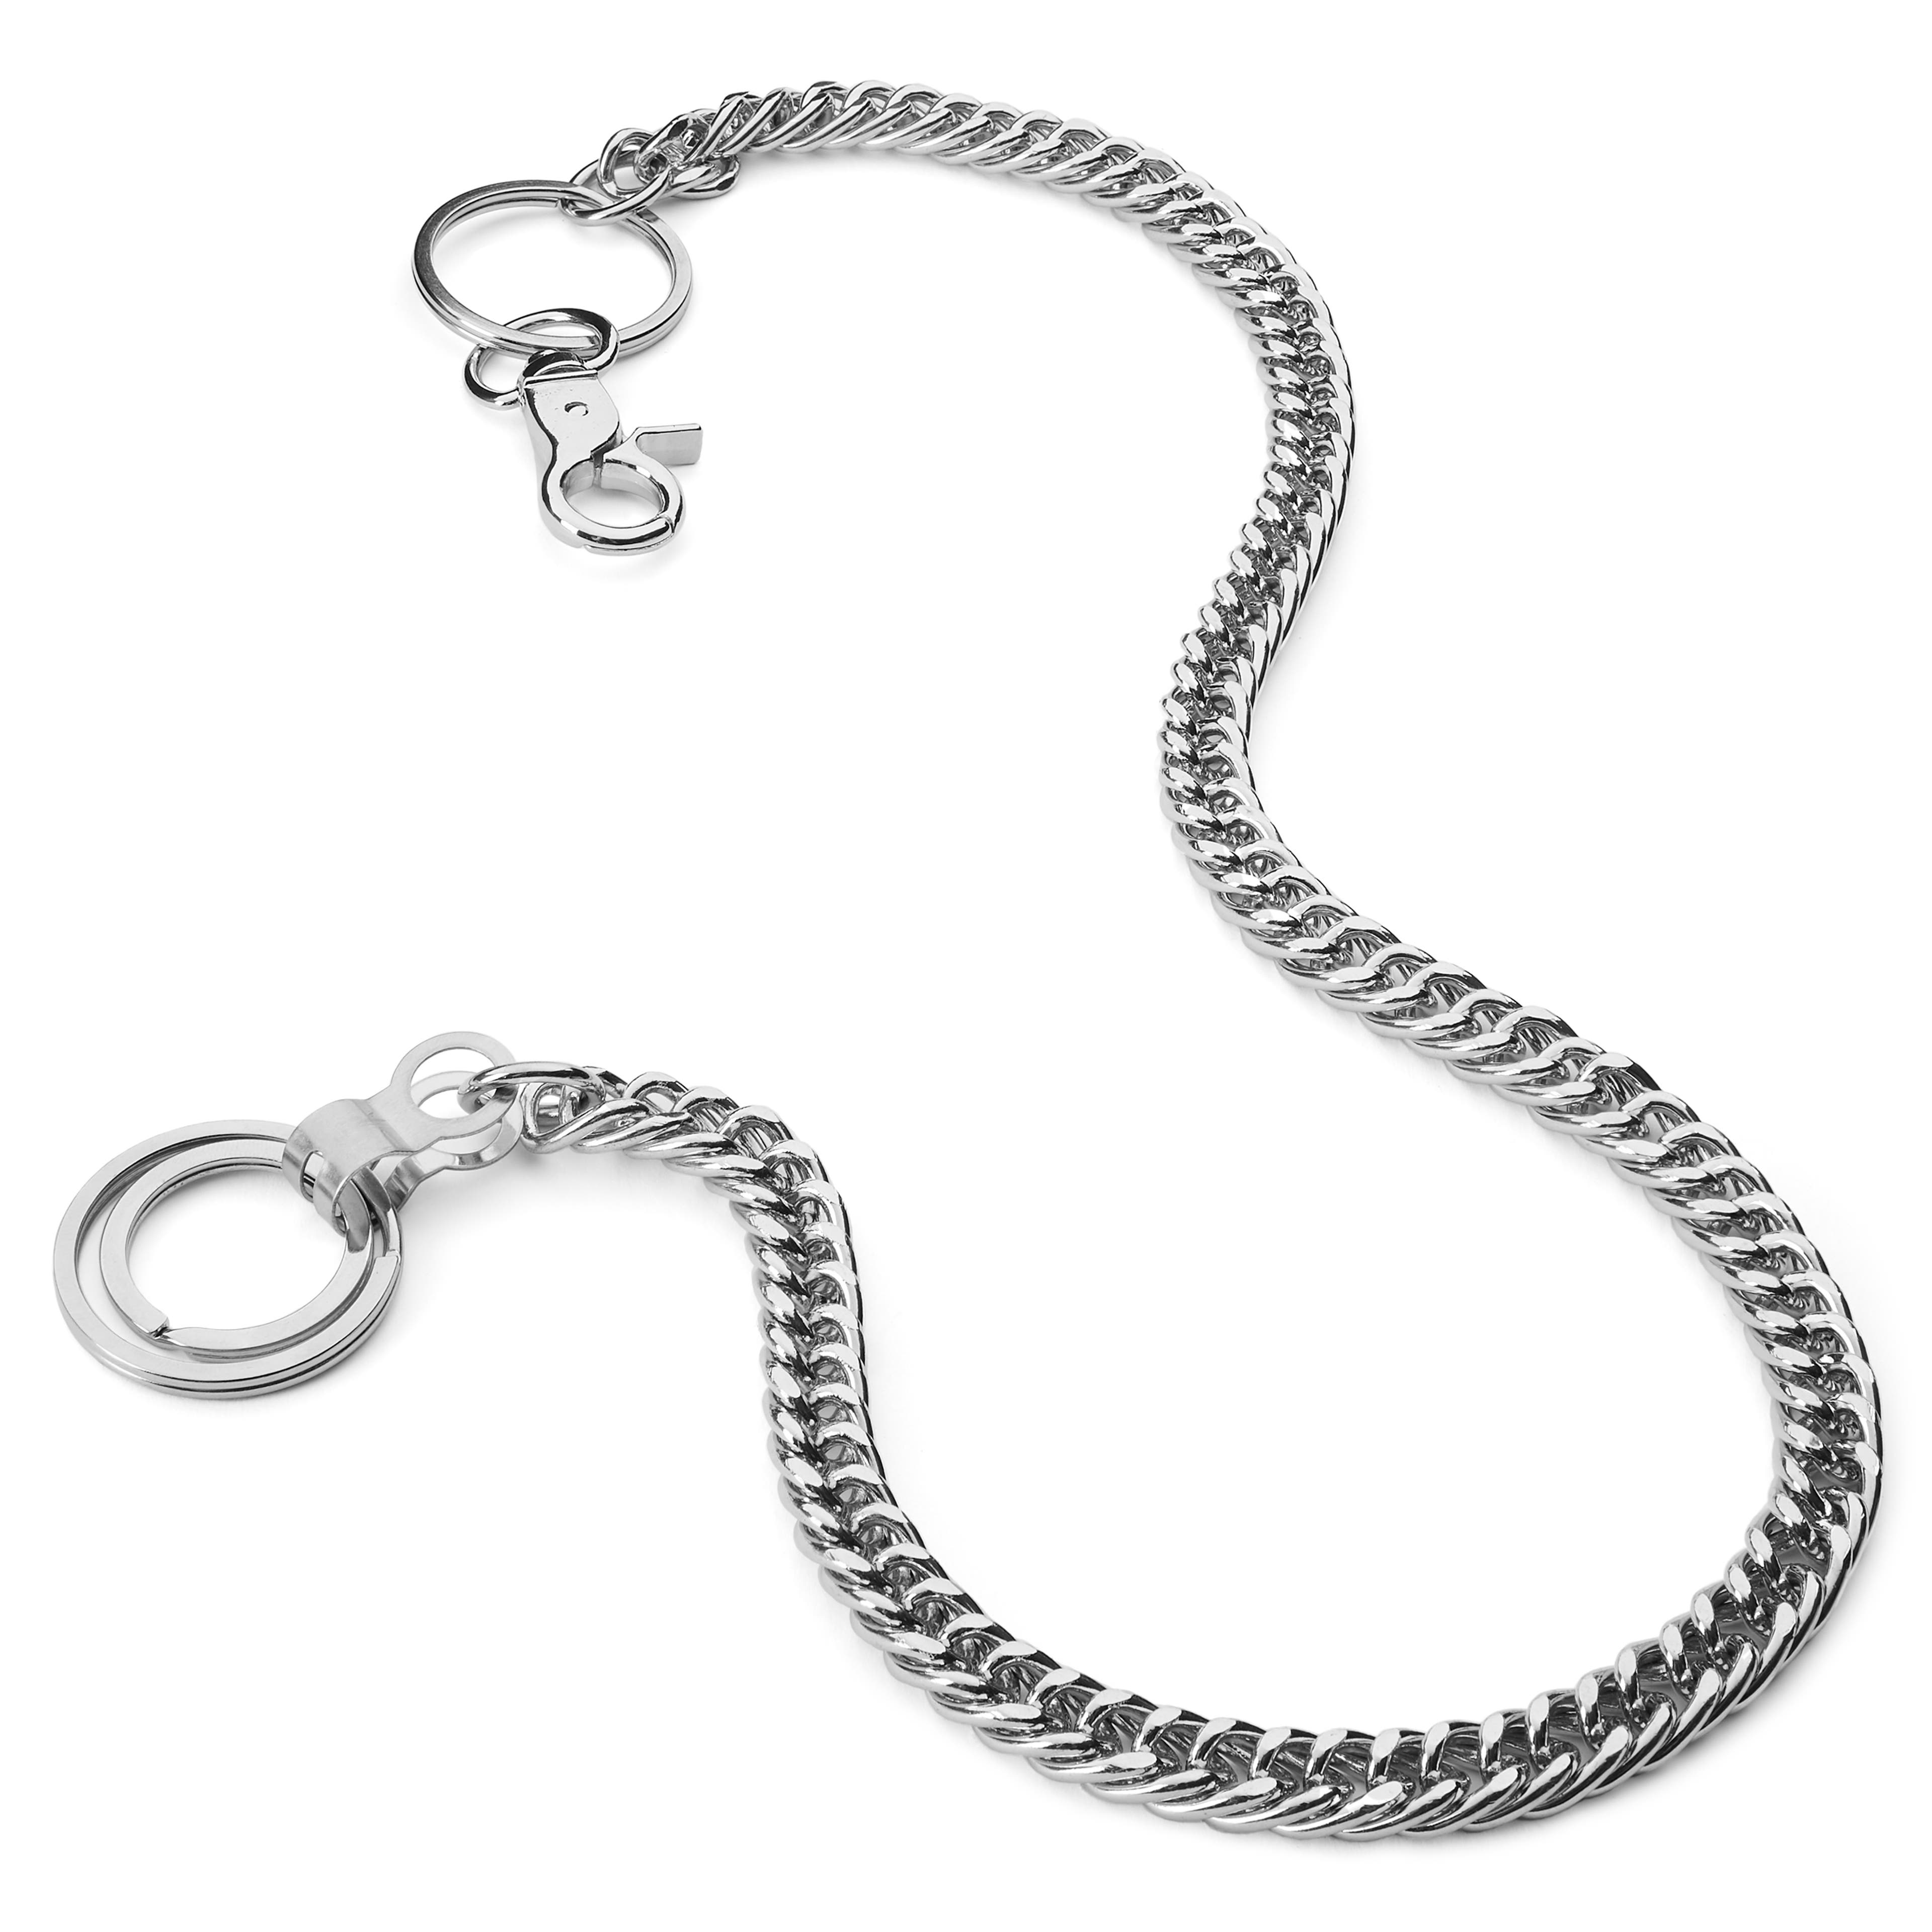 3 Ring Silver-Tone Wallet Chain